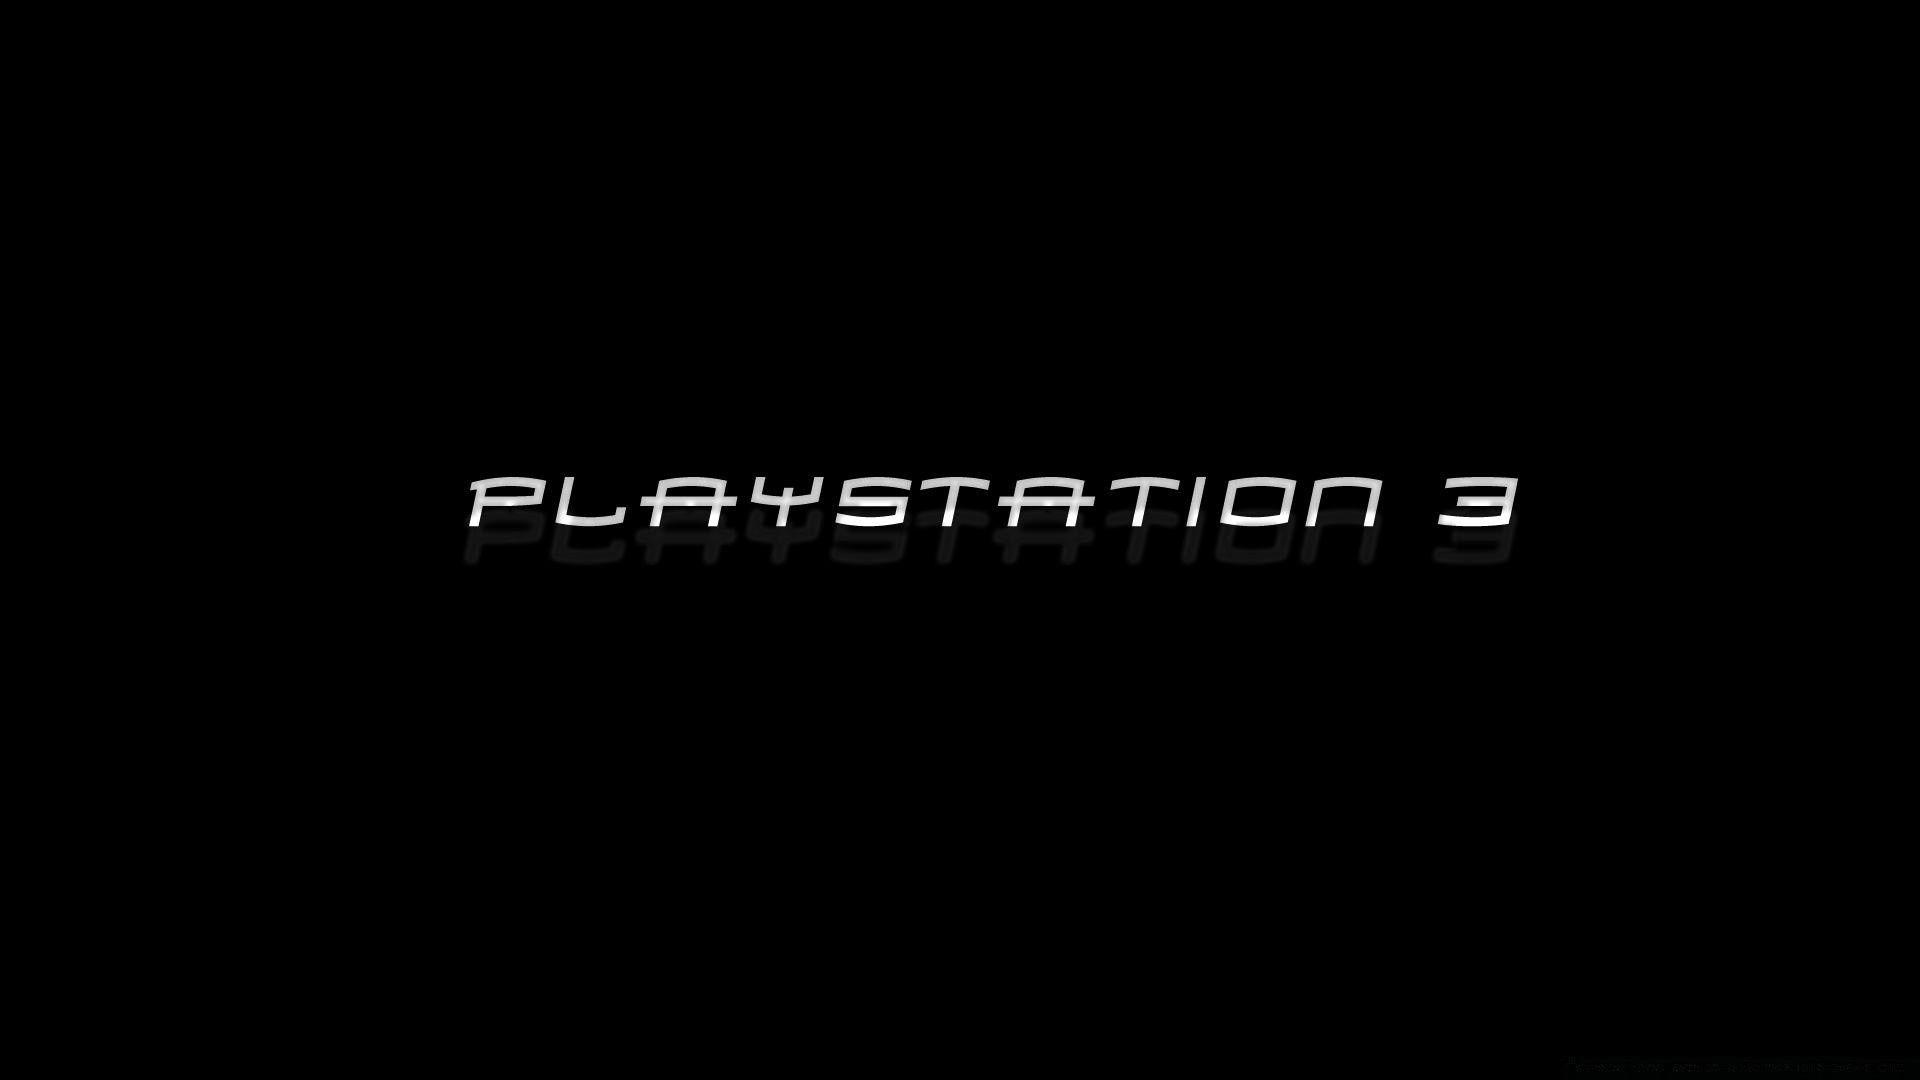 Playstation 3. Android wallpaper for free